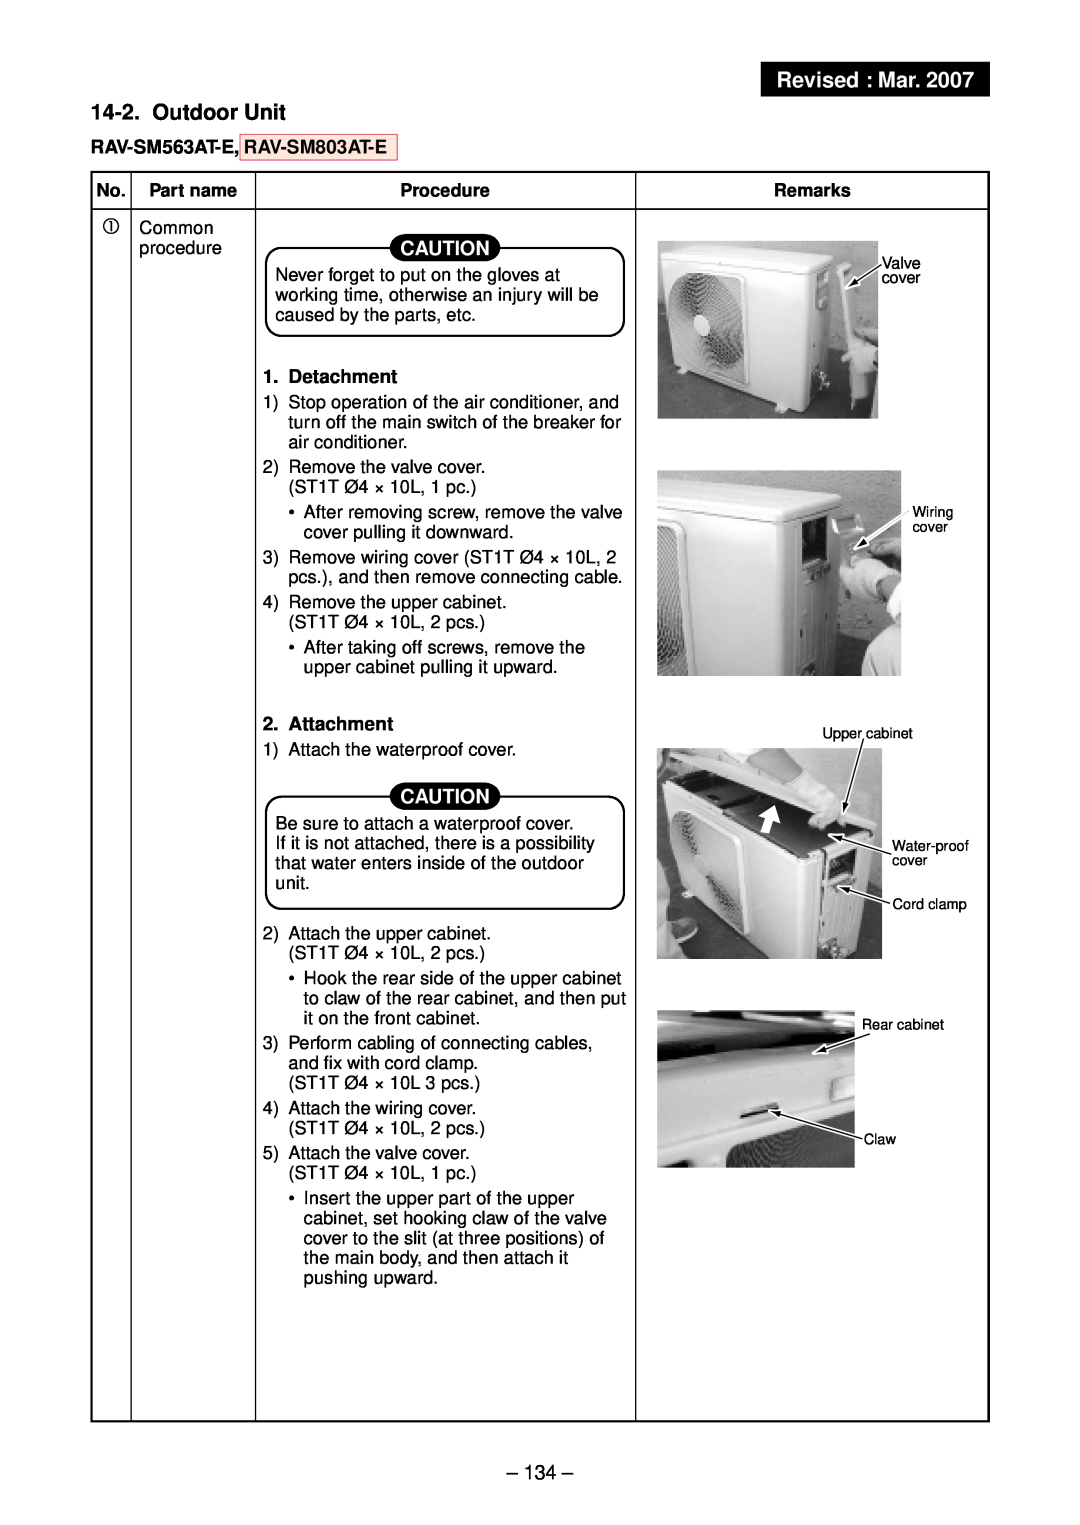 Toshiba RAV-SM802CT-E Revised Mar, Outdoor Unit, No. Part name, Procedure, Remarks, Water-proof, Rear cabinet 